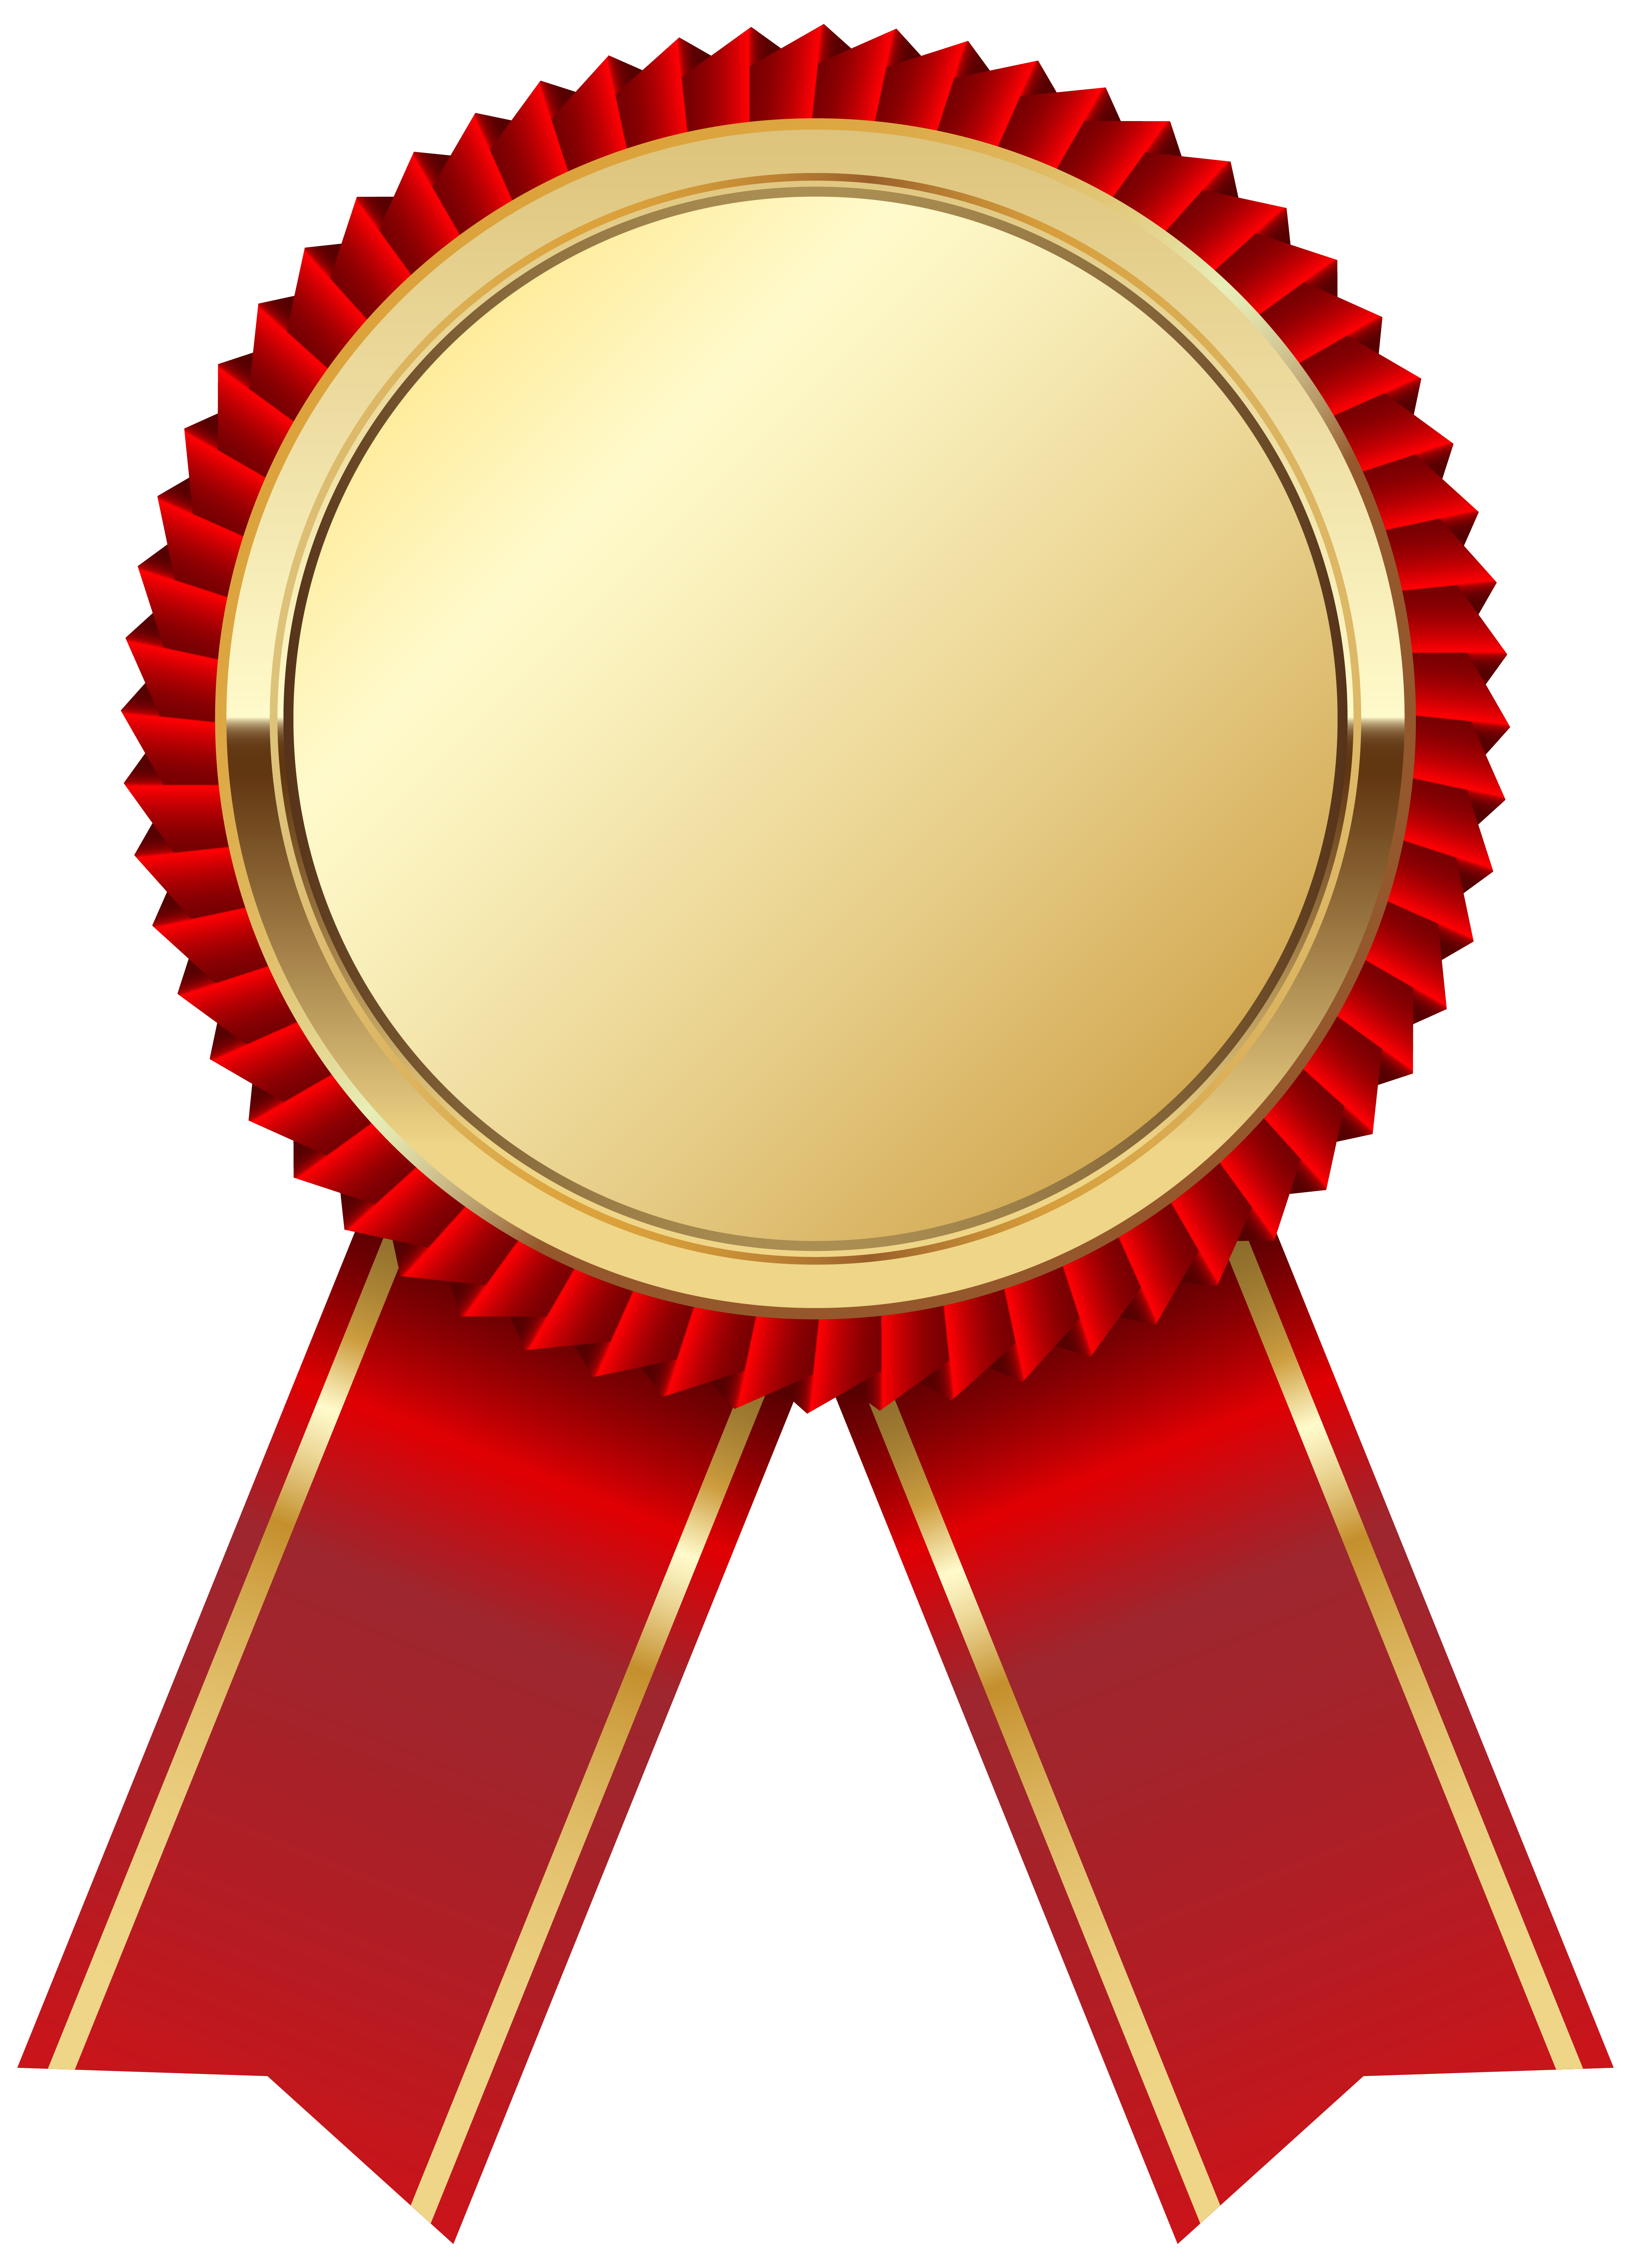 clip art medals and trophies - photo #47